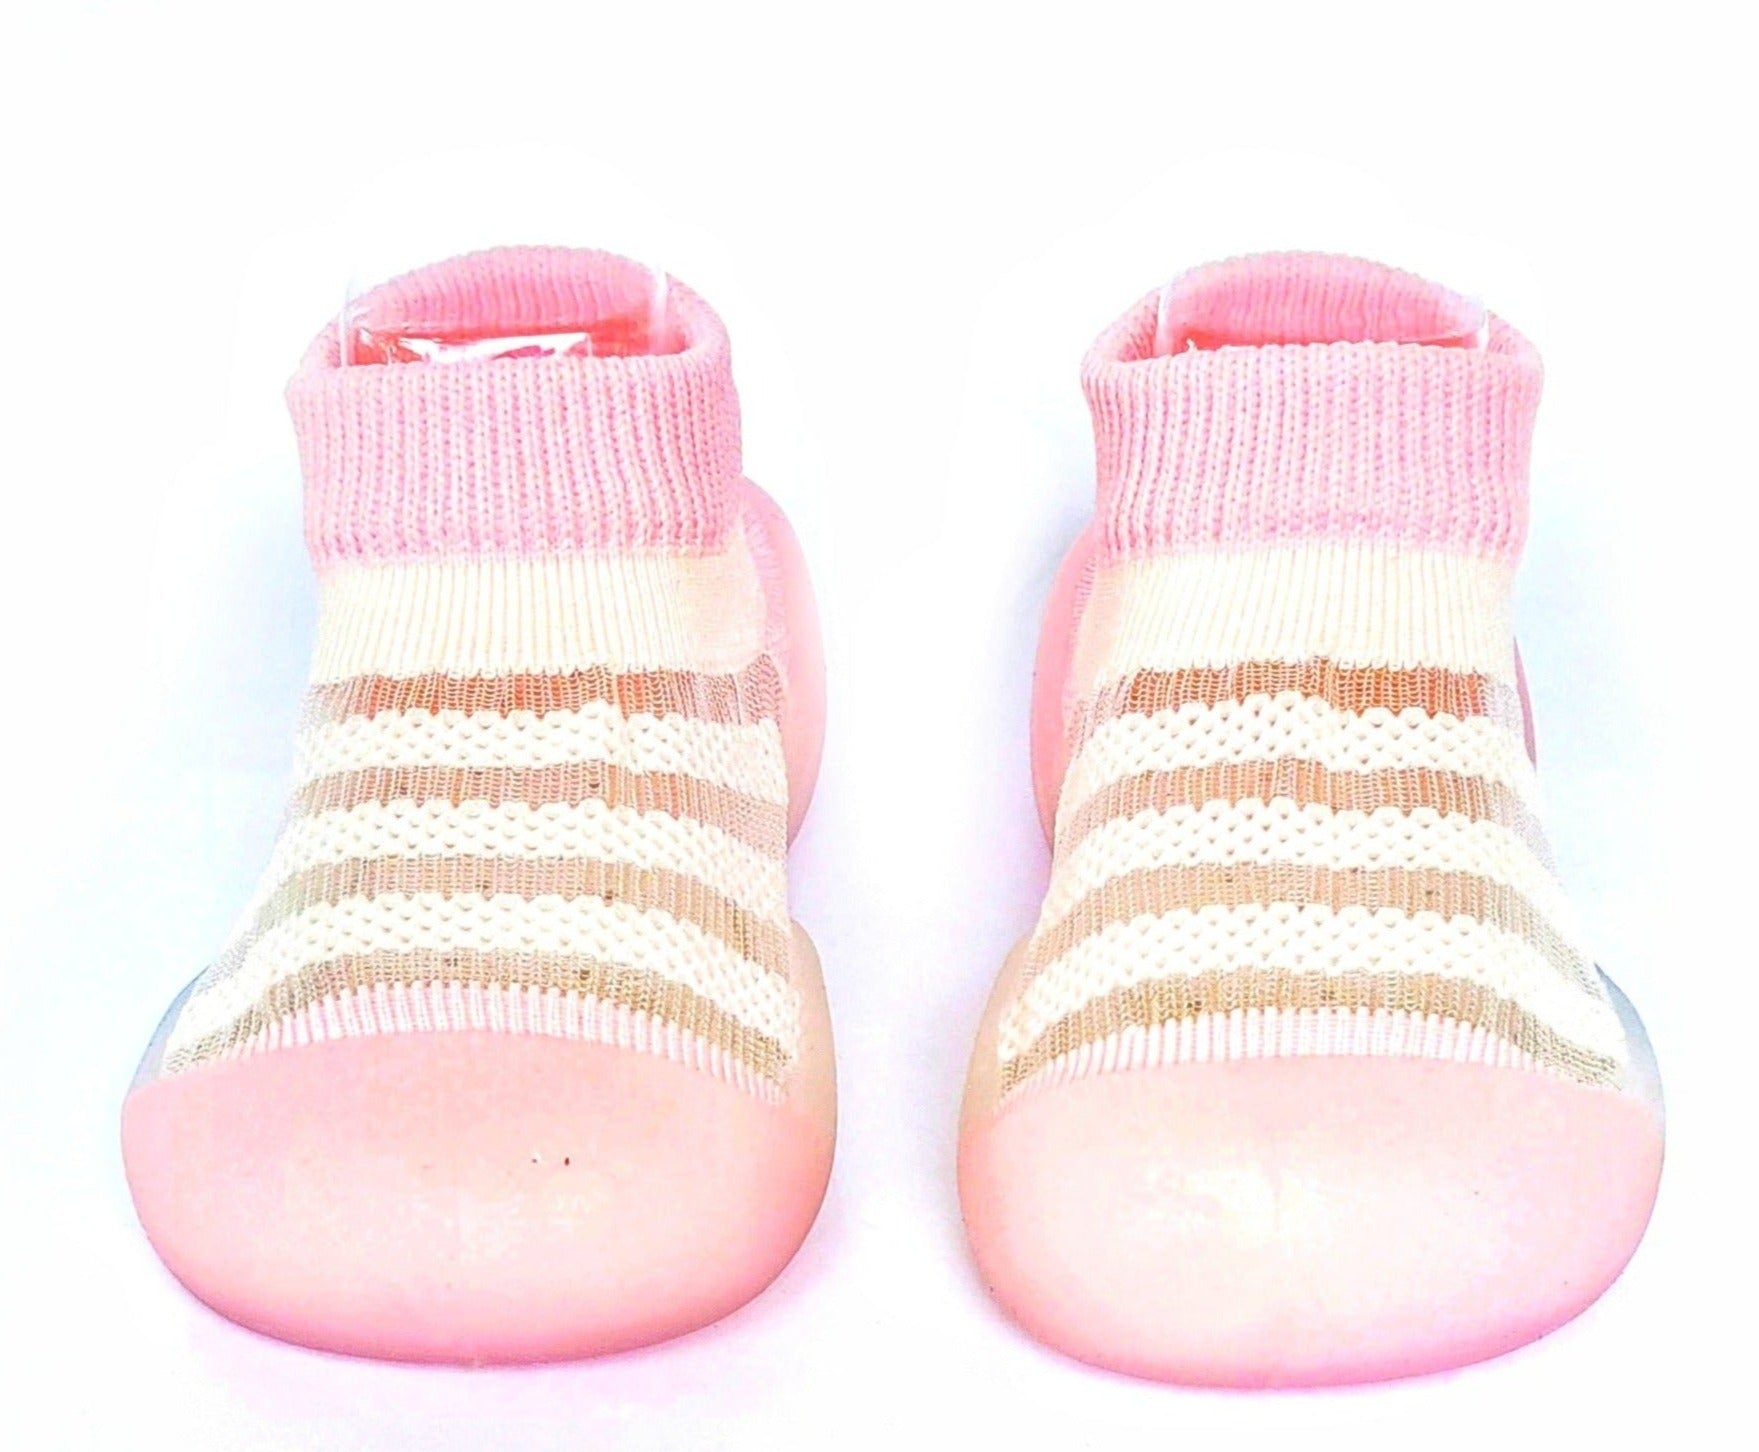 Golden Slipper by Bearba-Sock Shoes for Babies & Toddlers, Sizes- XS,S,M- Flexible Soles, Machine Washable- Pink/Green - Bearba